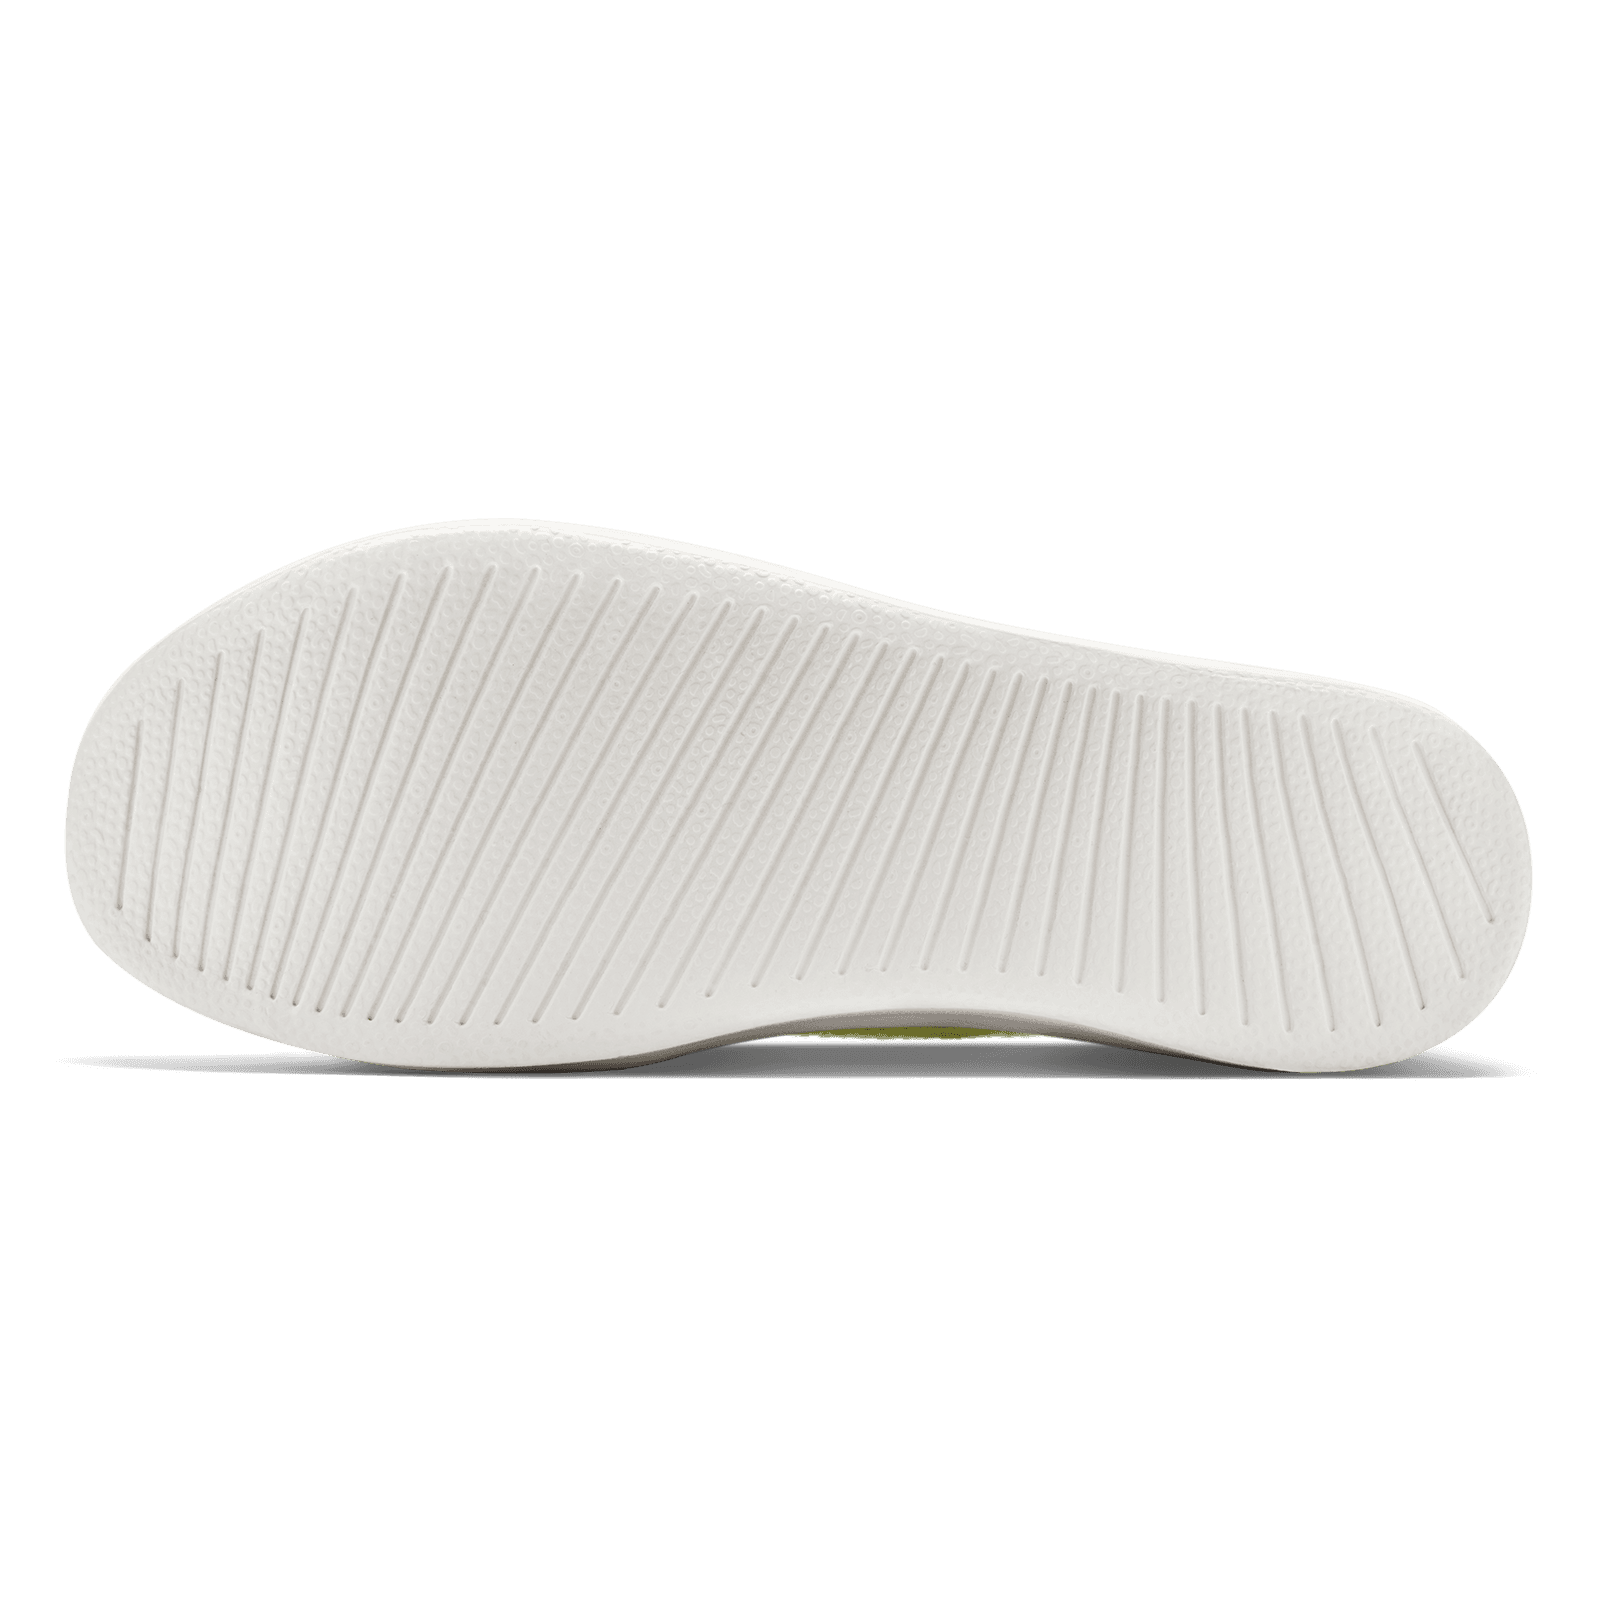 Women's Wool Loungers - Hazy Lime (Natural White Sole)